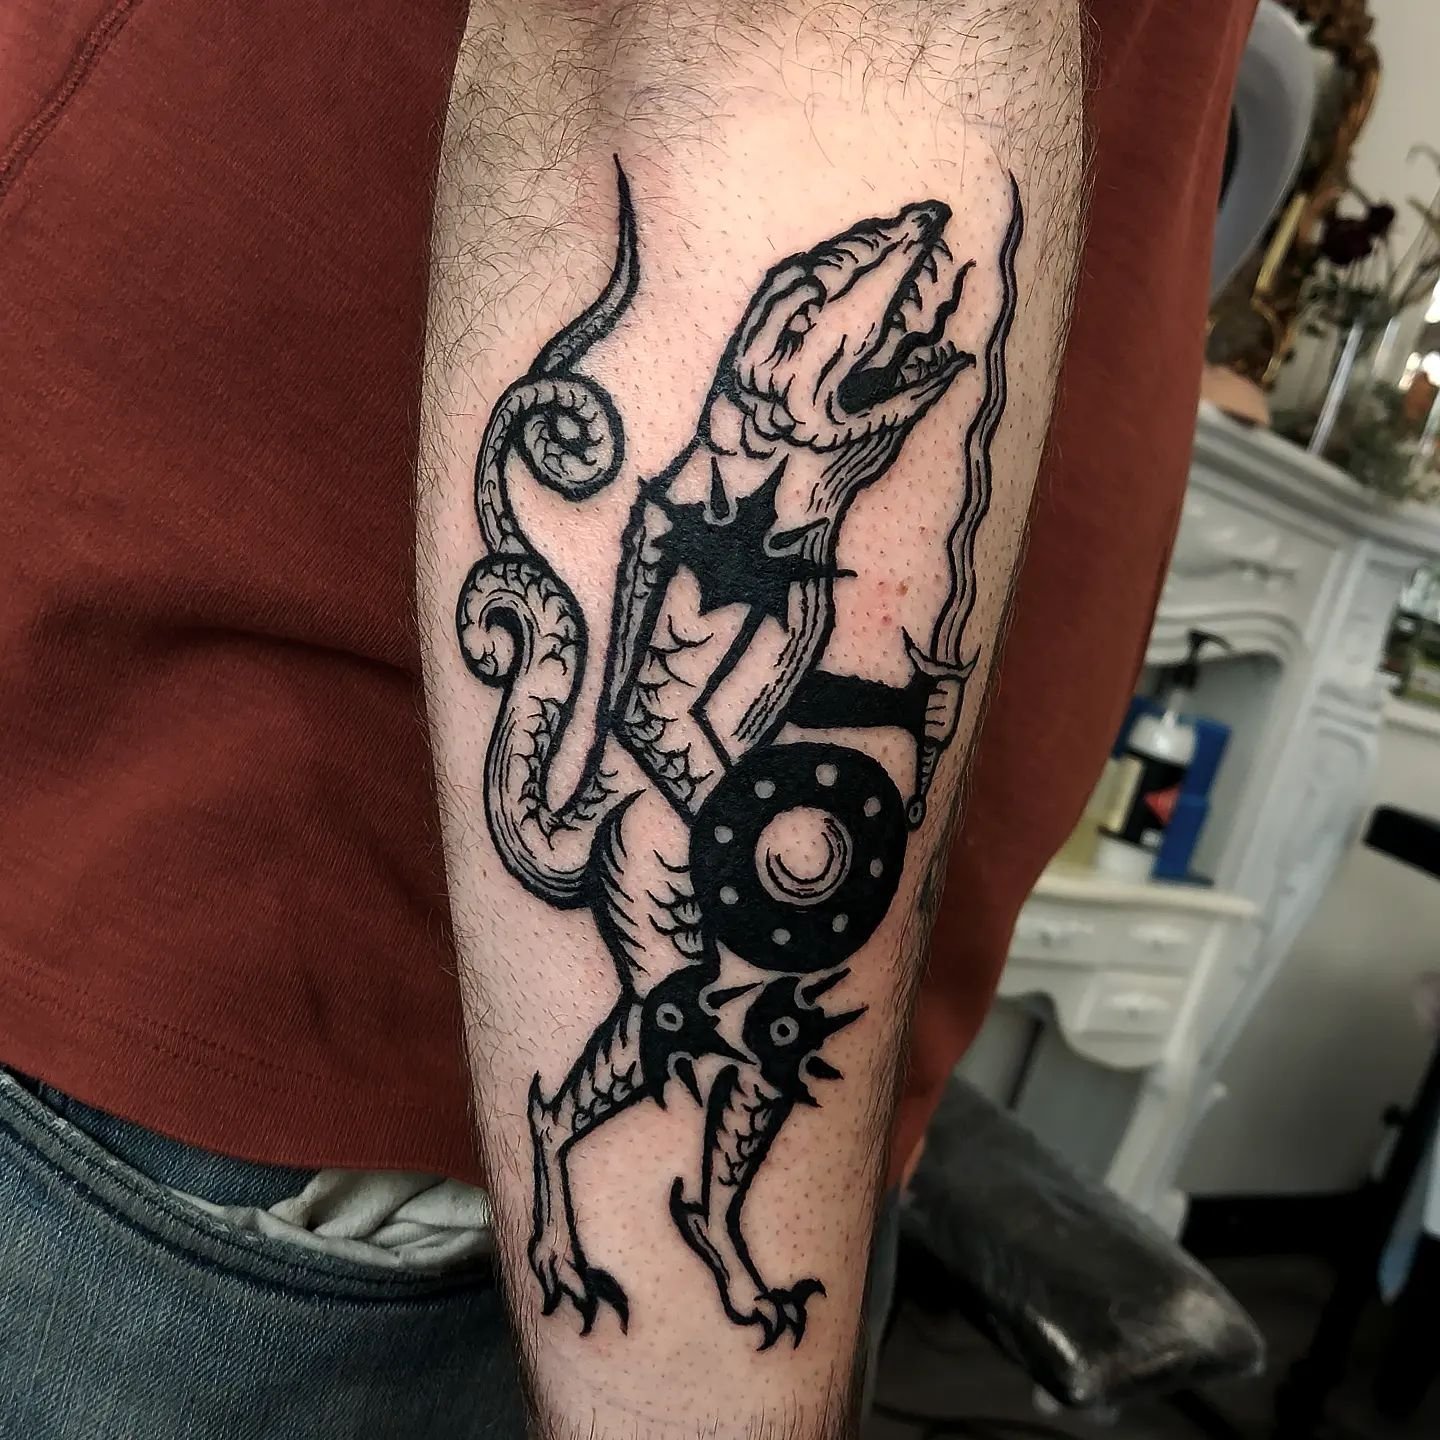 Barbarian Lizard for Jack, thank you so much for your repeated trust!!
.
.
.
#medievaltattoo #dndtattoo #darkfantasytattoo #engravingtattoo #paristattoo #vancouvertattoo